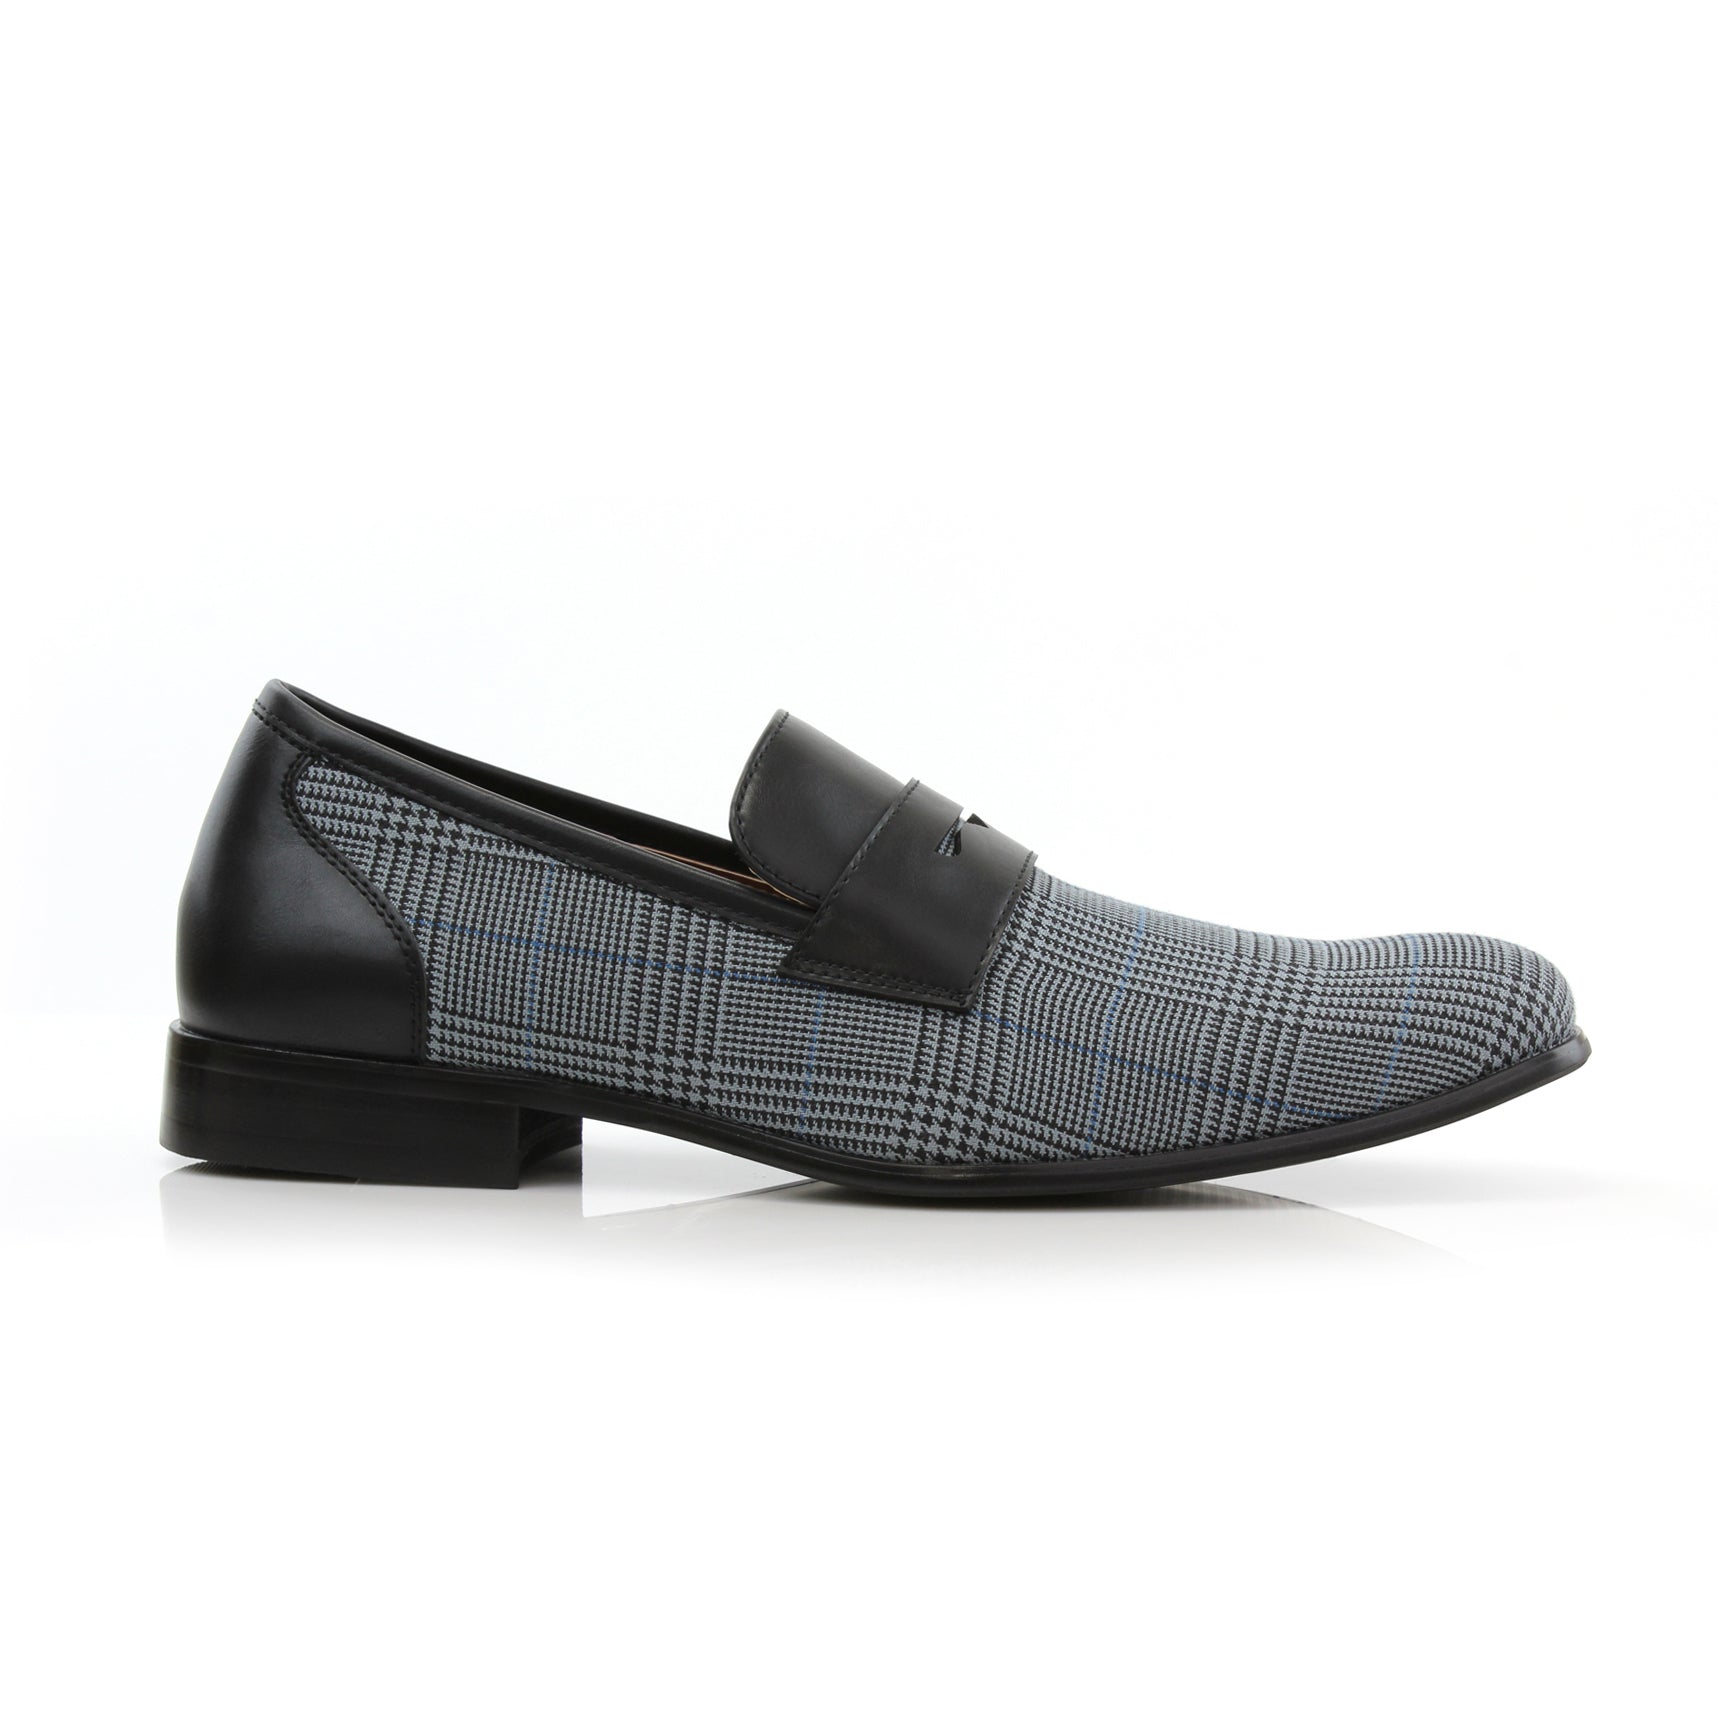 Plaid Loafers | Sidney by Ferro Aldo | Conal Footwear | Outer Side Angle View